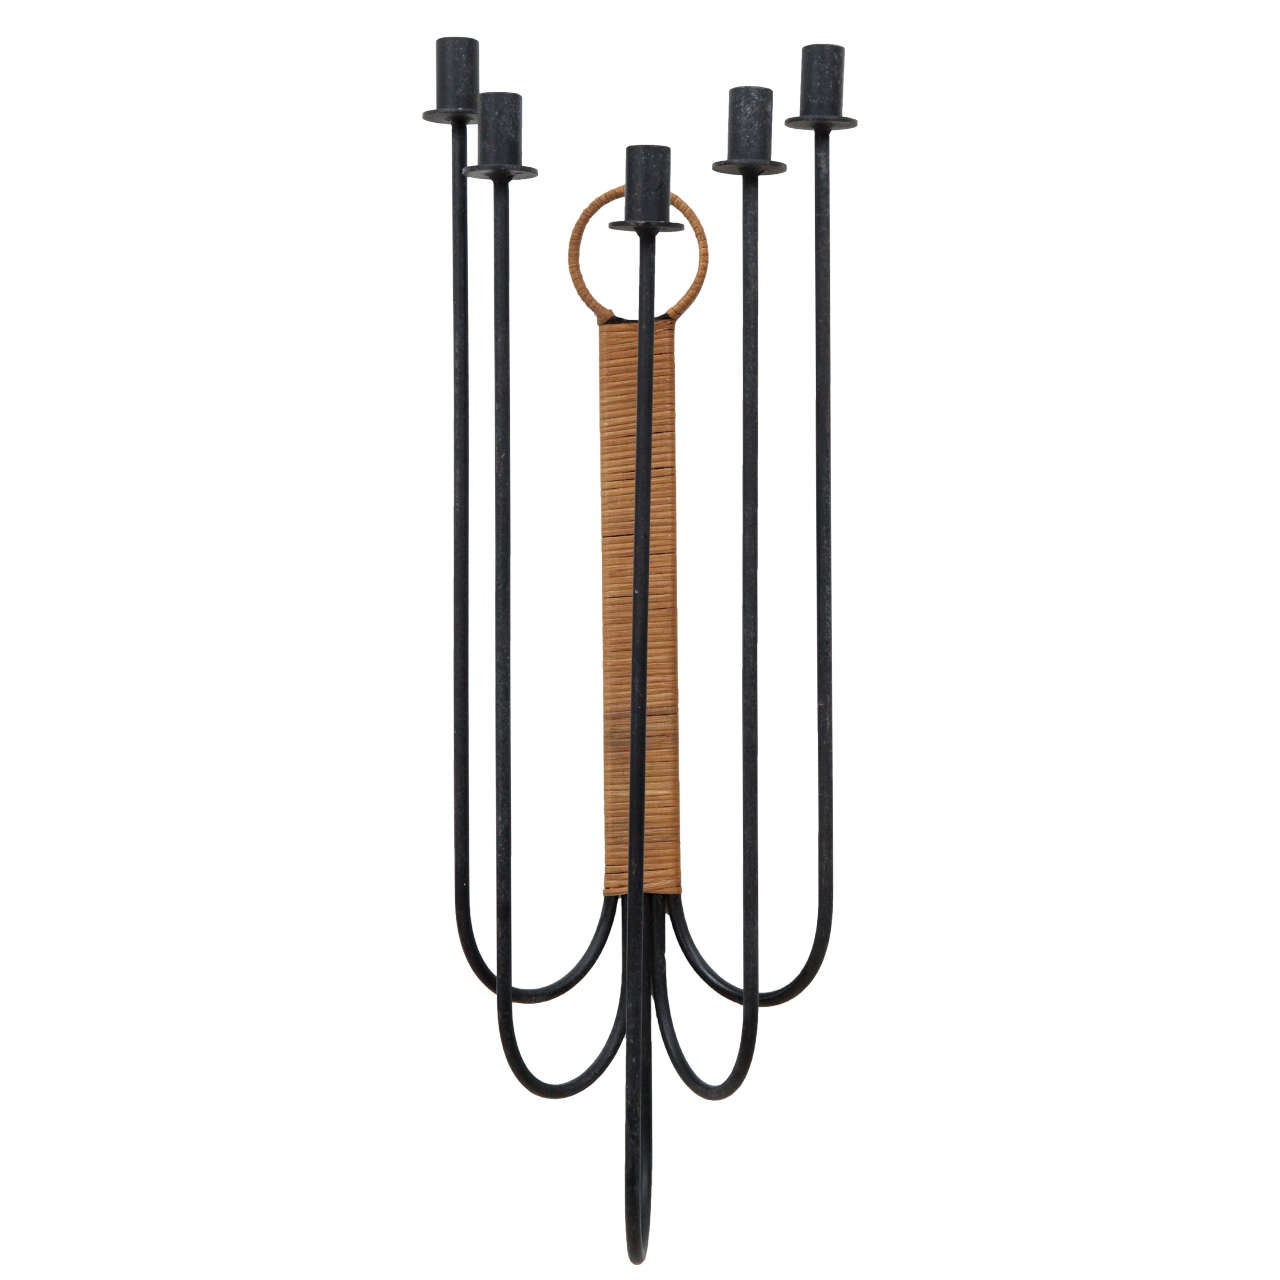 Iron and Cane Hanging Candelabra by Raymor